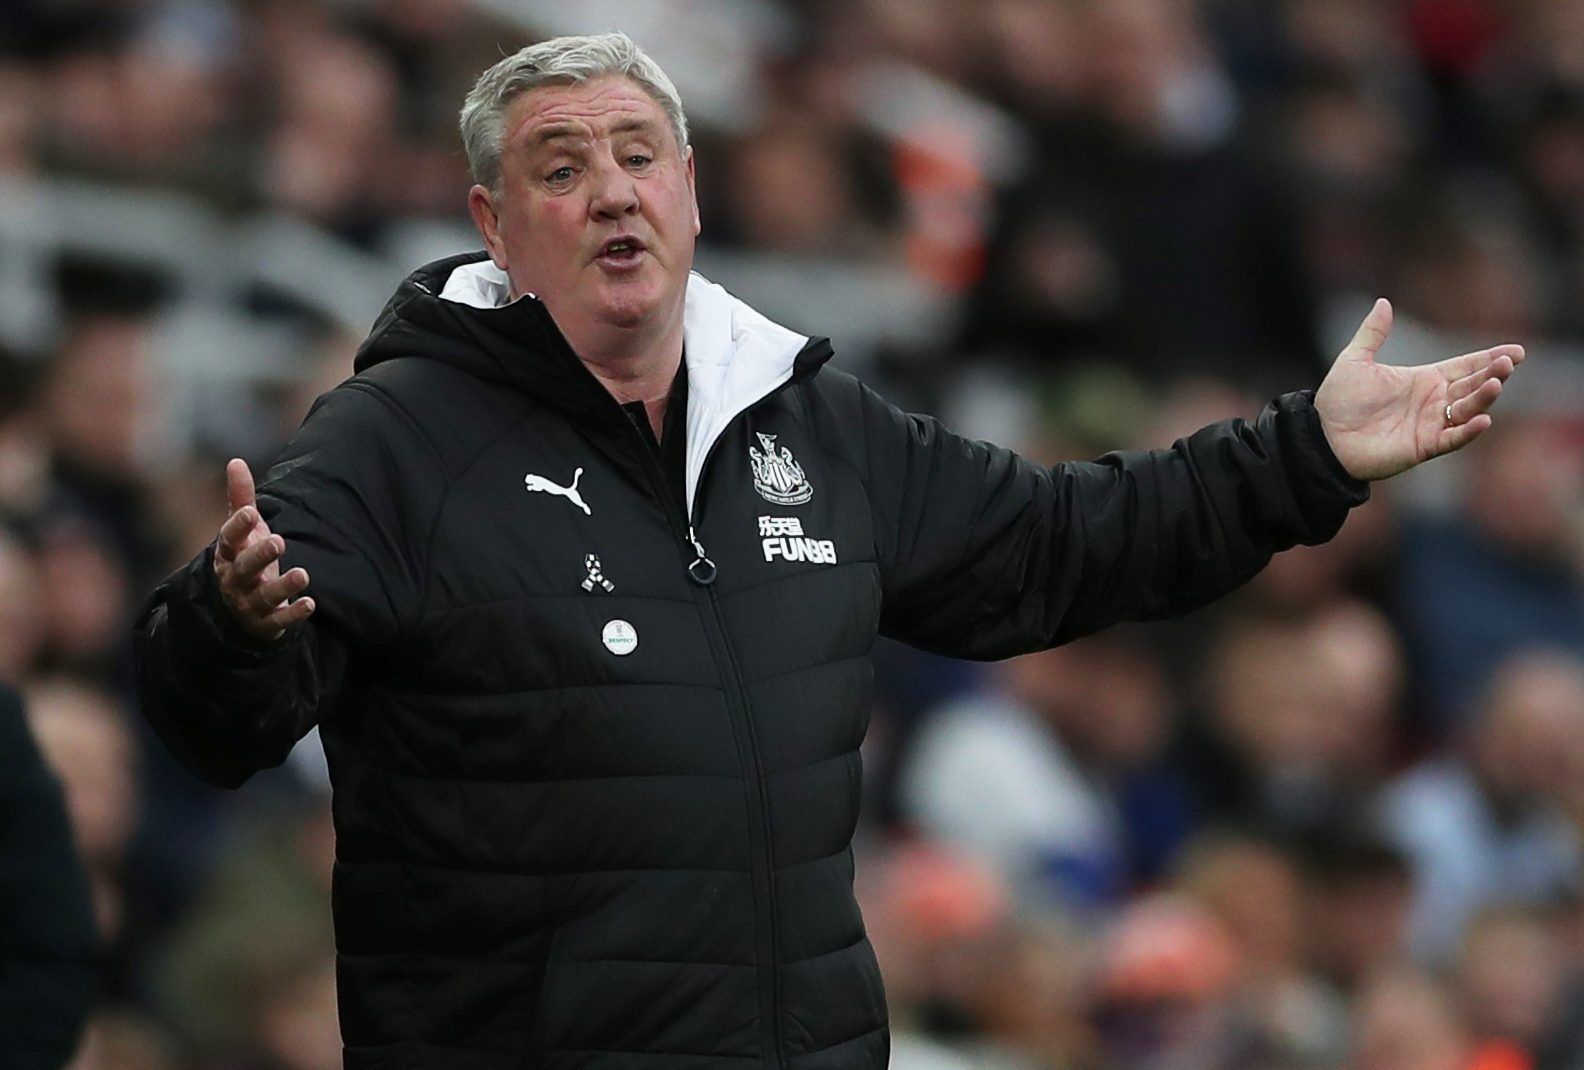 Soccer Football - Premier League - Newcastle United v Norwich City - St James' Park, Newcastle, Britain - February 1, 2020  Newcastle United manager Steve Bruce   Action Images via Reuters/Lee Smith  EDITORIAL USE ONLY. No use with unauthorized audio, video, data, fixture lists, club/league logos or 